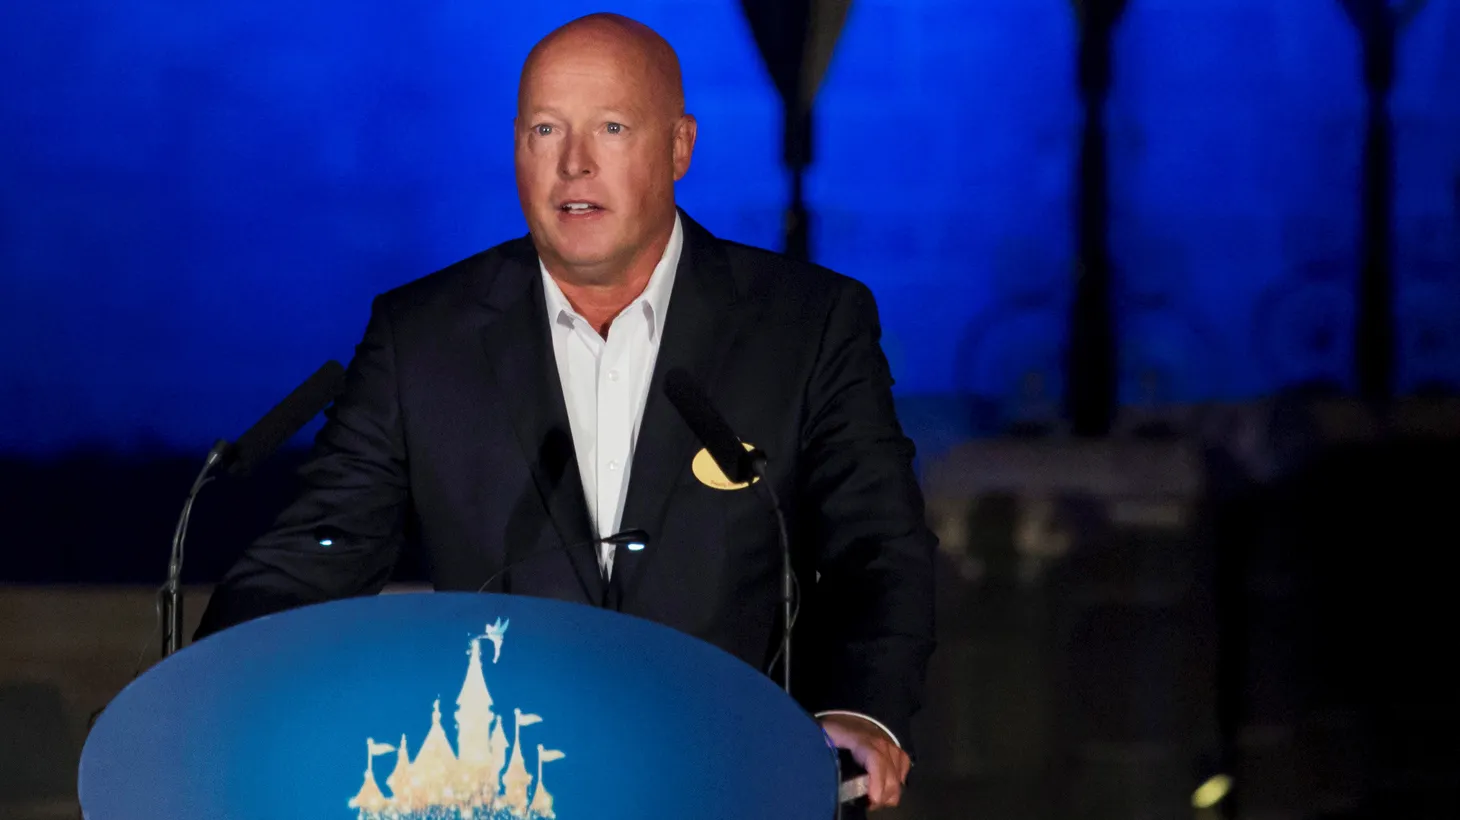 “Just because you get a renewal, doesn't mean that you are safe for another three years,” says Matt Belloni about Disney’s CEO Bob Chapek’s new contract. Chapek speaks during the 10th anniversary ceremony of Hong Kong Disneyland park in China on September 11, 2015.